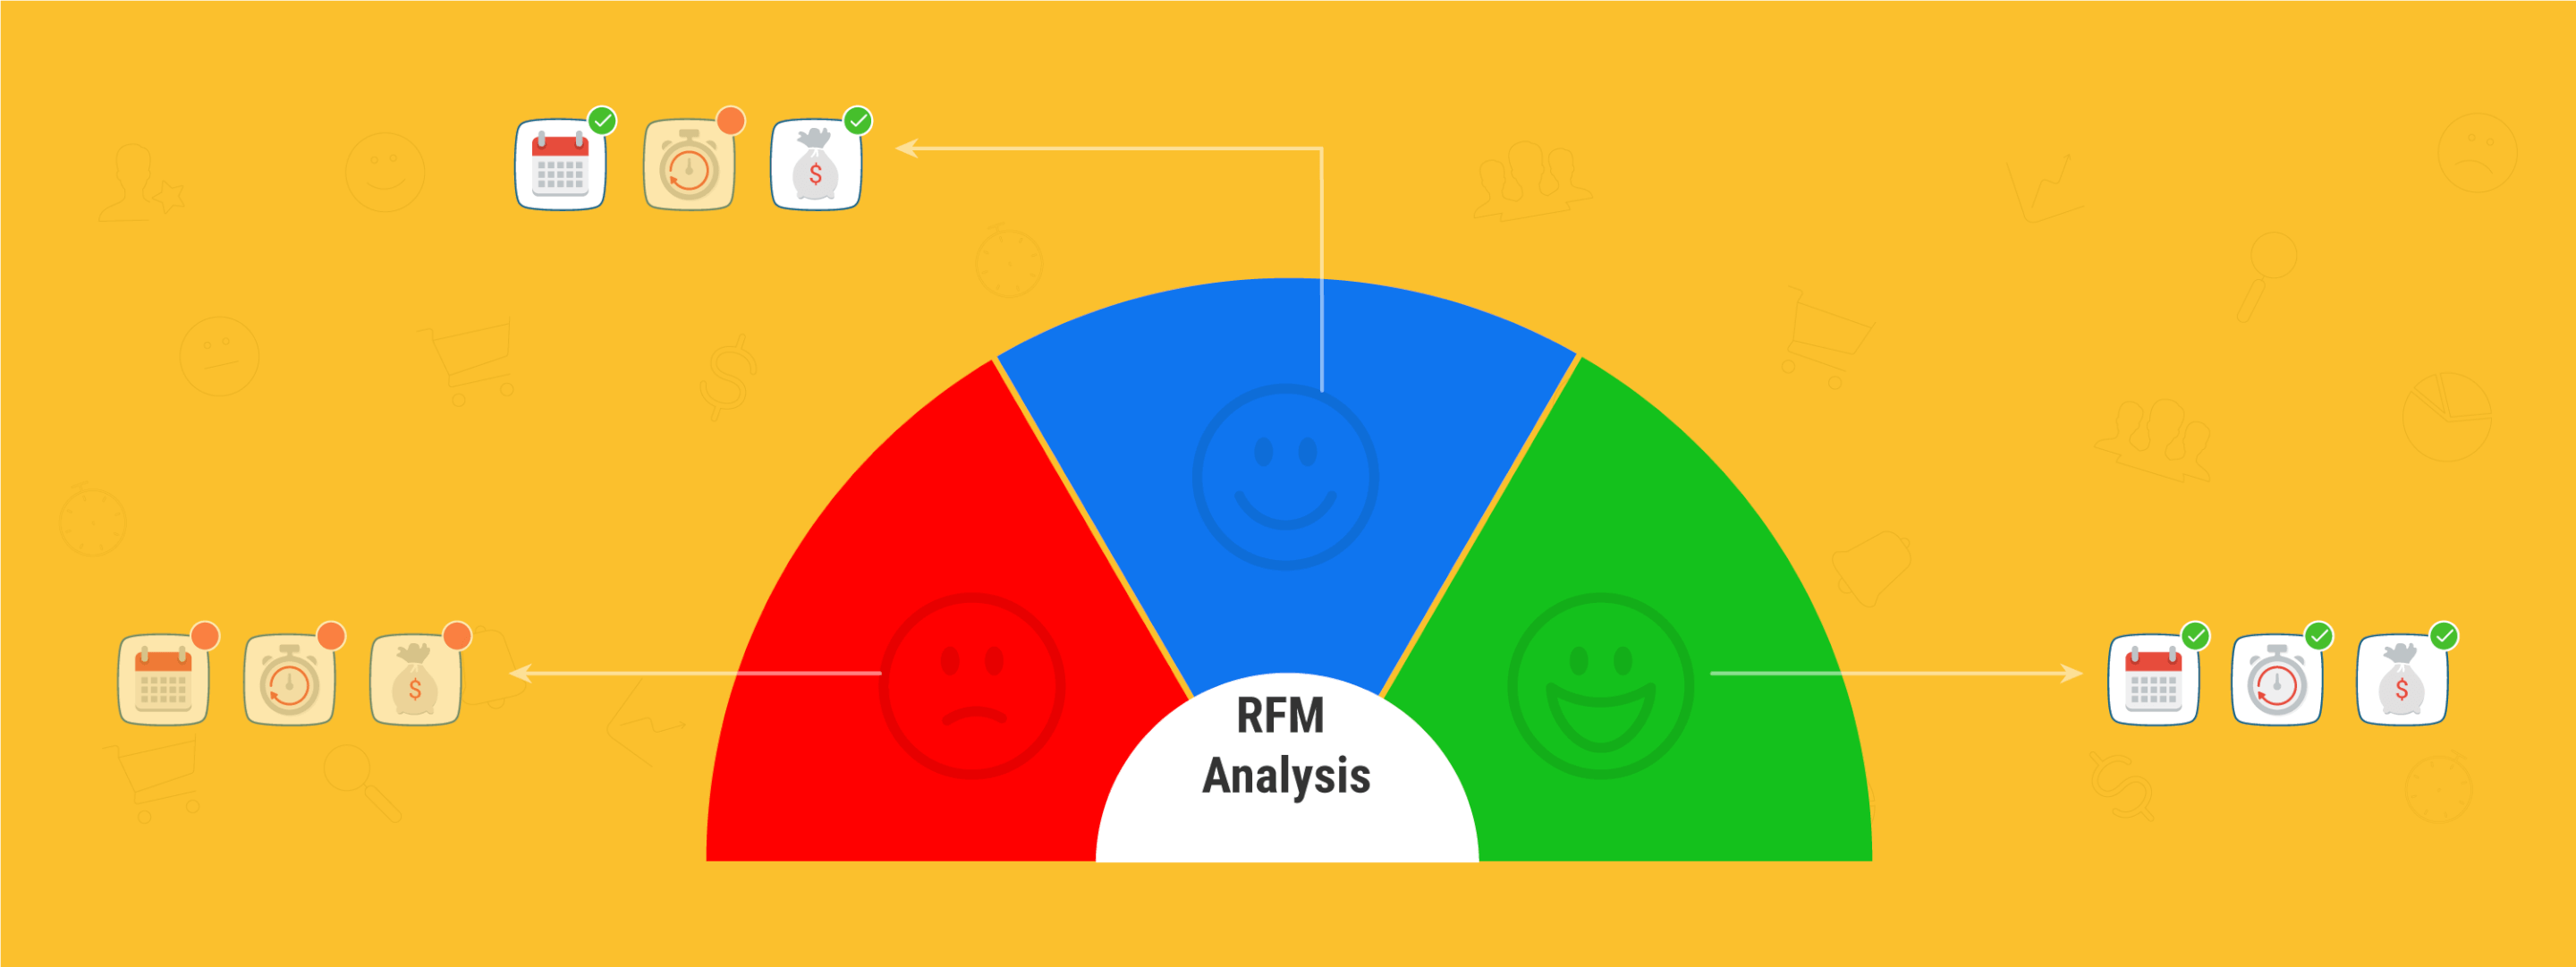 How To Use RFM Analysis